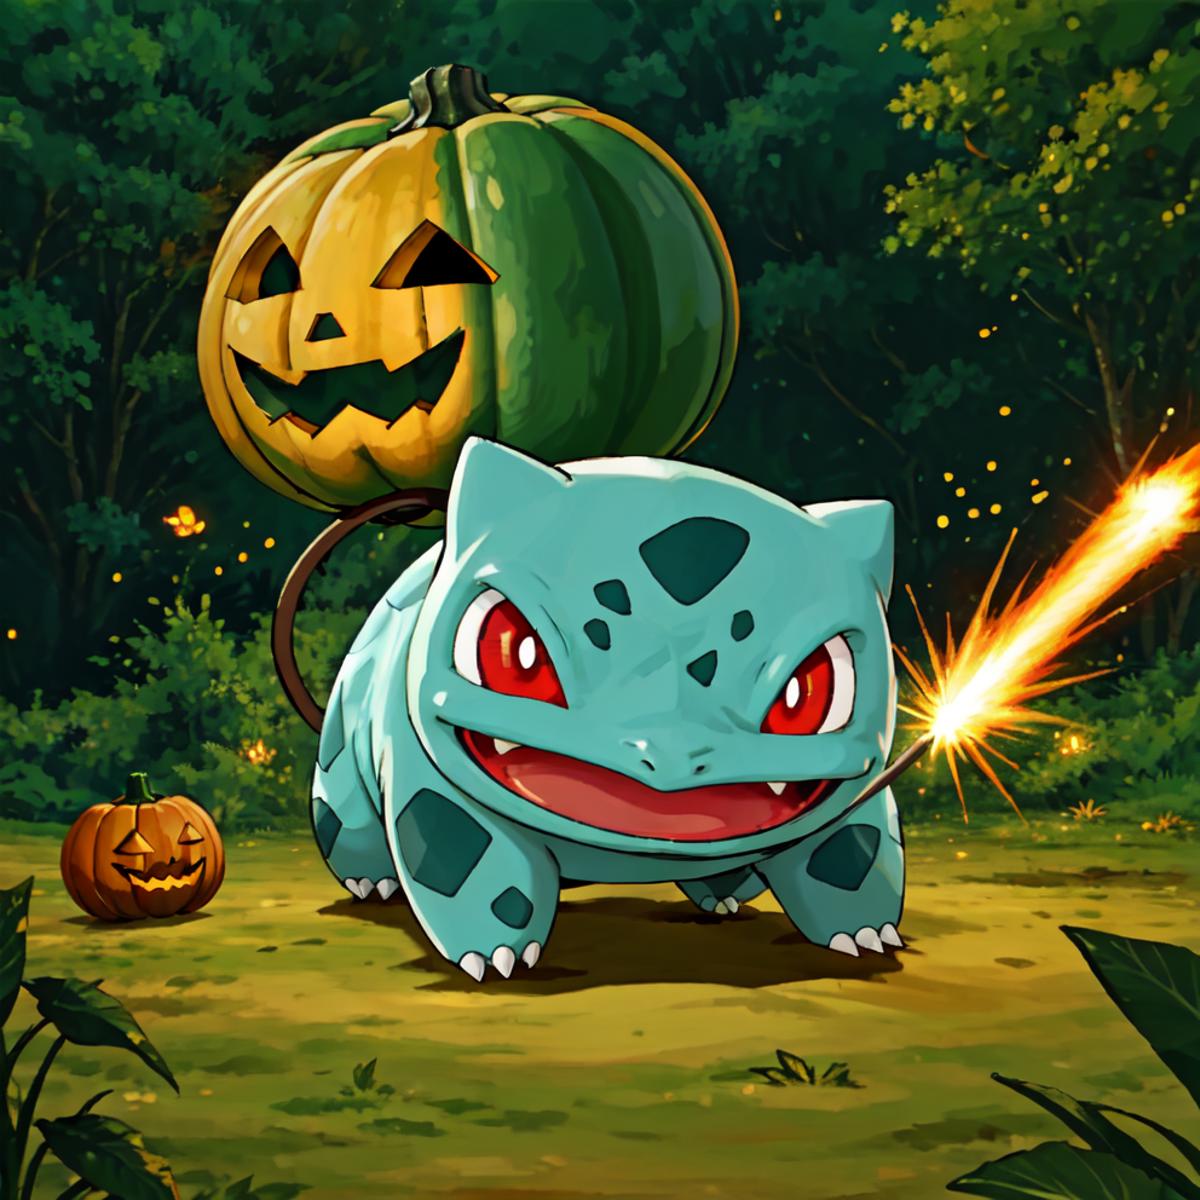 Bulbasaur - Pokemon image by mysticred